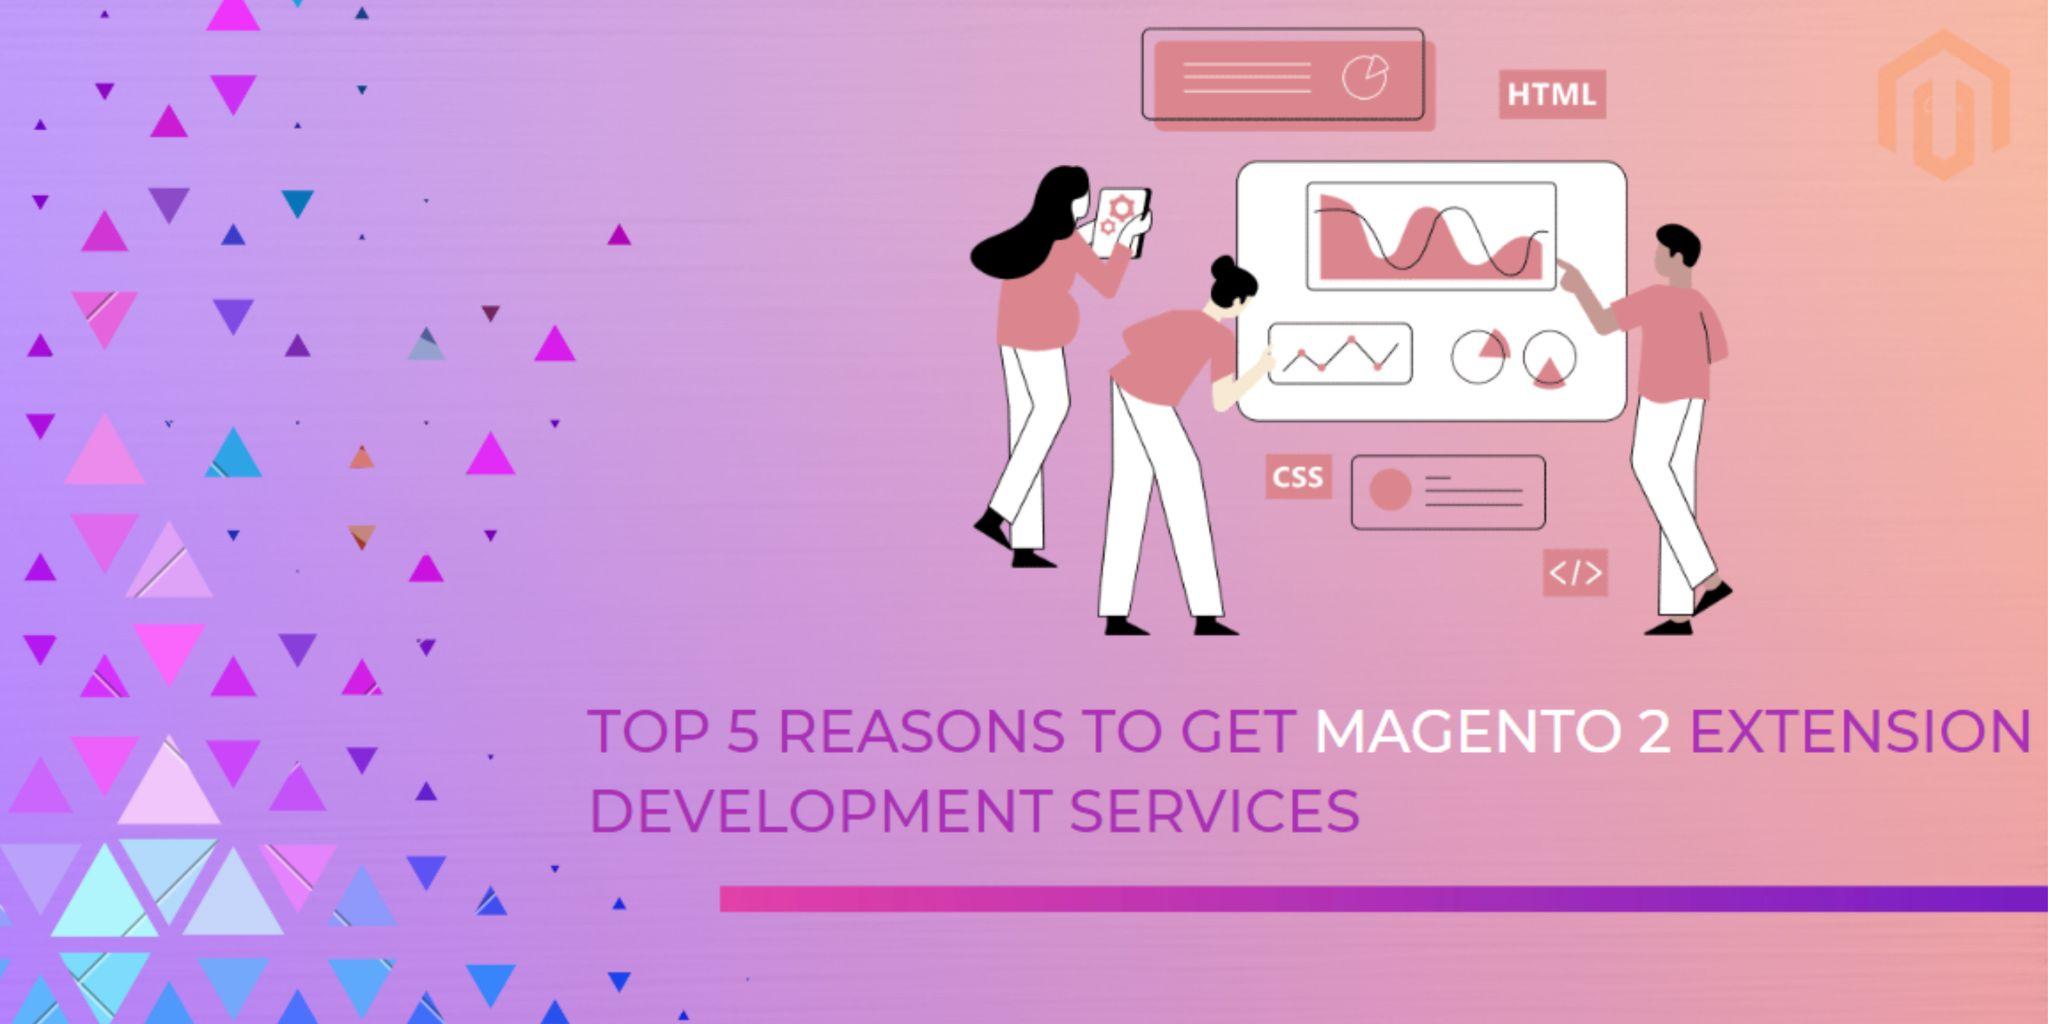 Top 5 Reasons To Get Magento Extension Development Services